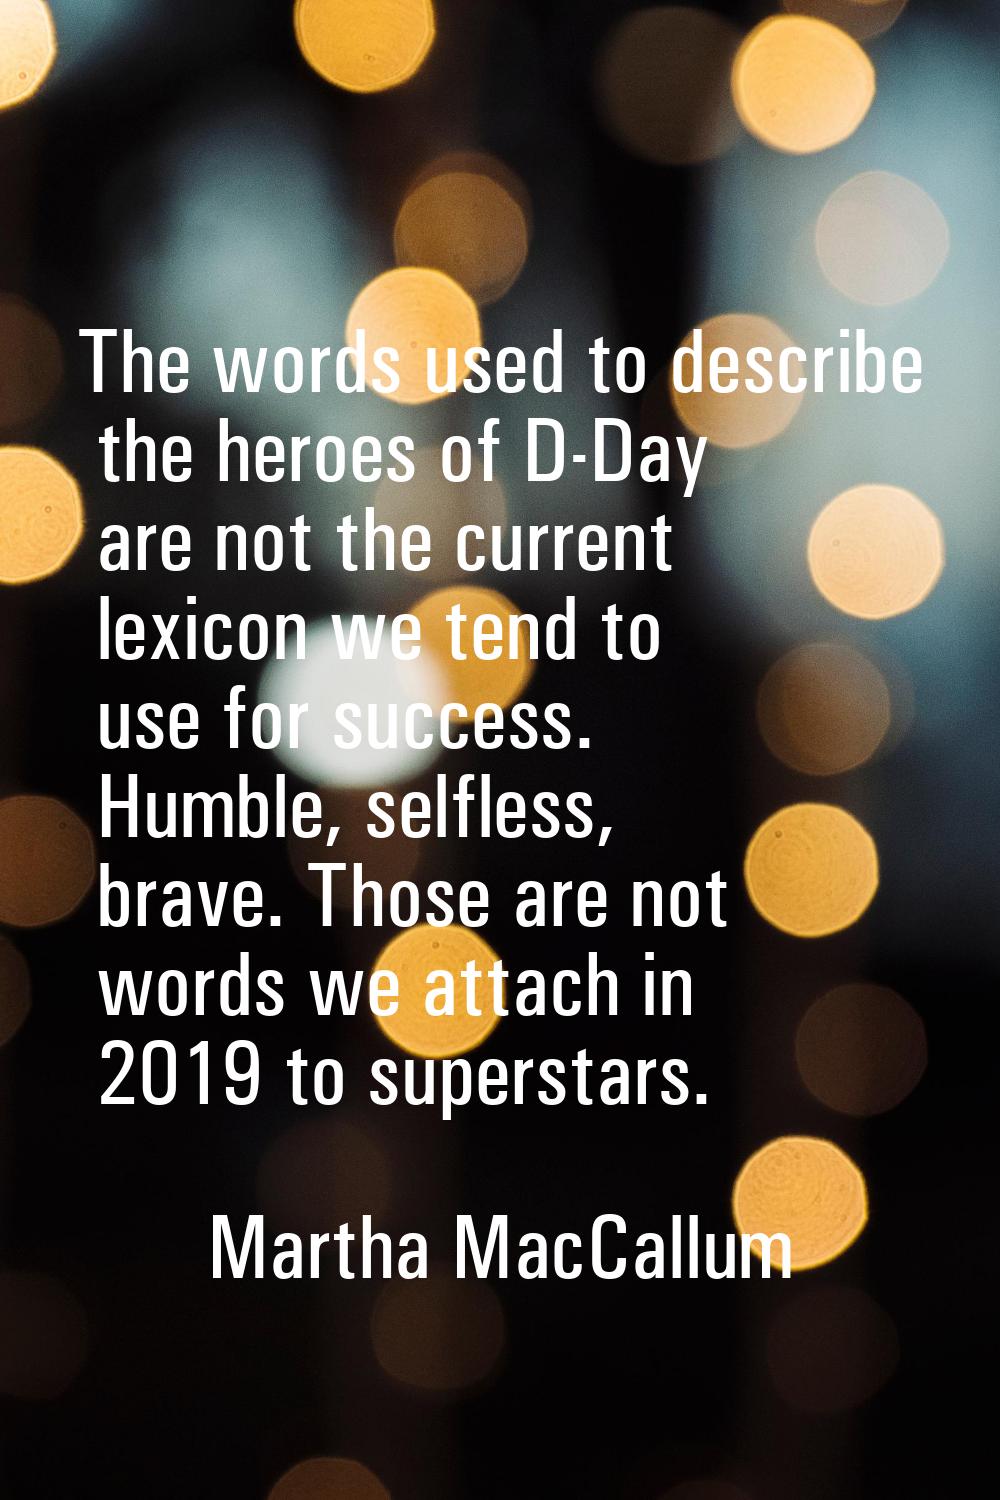 The words used to describe the heroes of D-Day are not the current lexicon we tend to use for succe